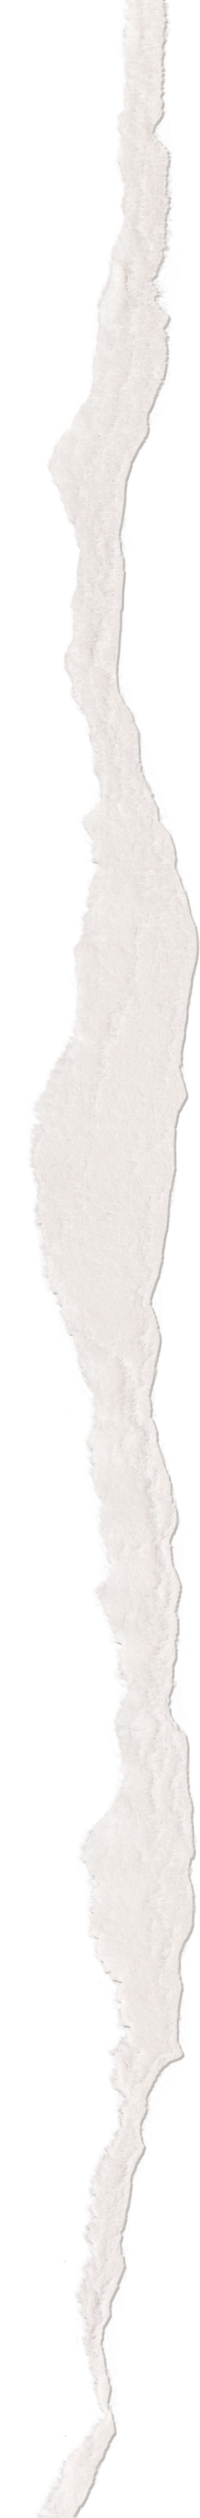 White torn texture